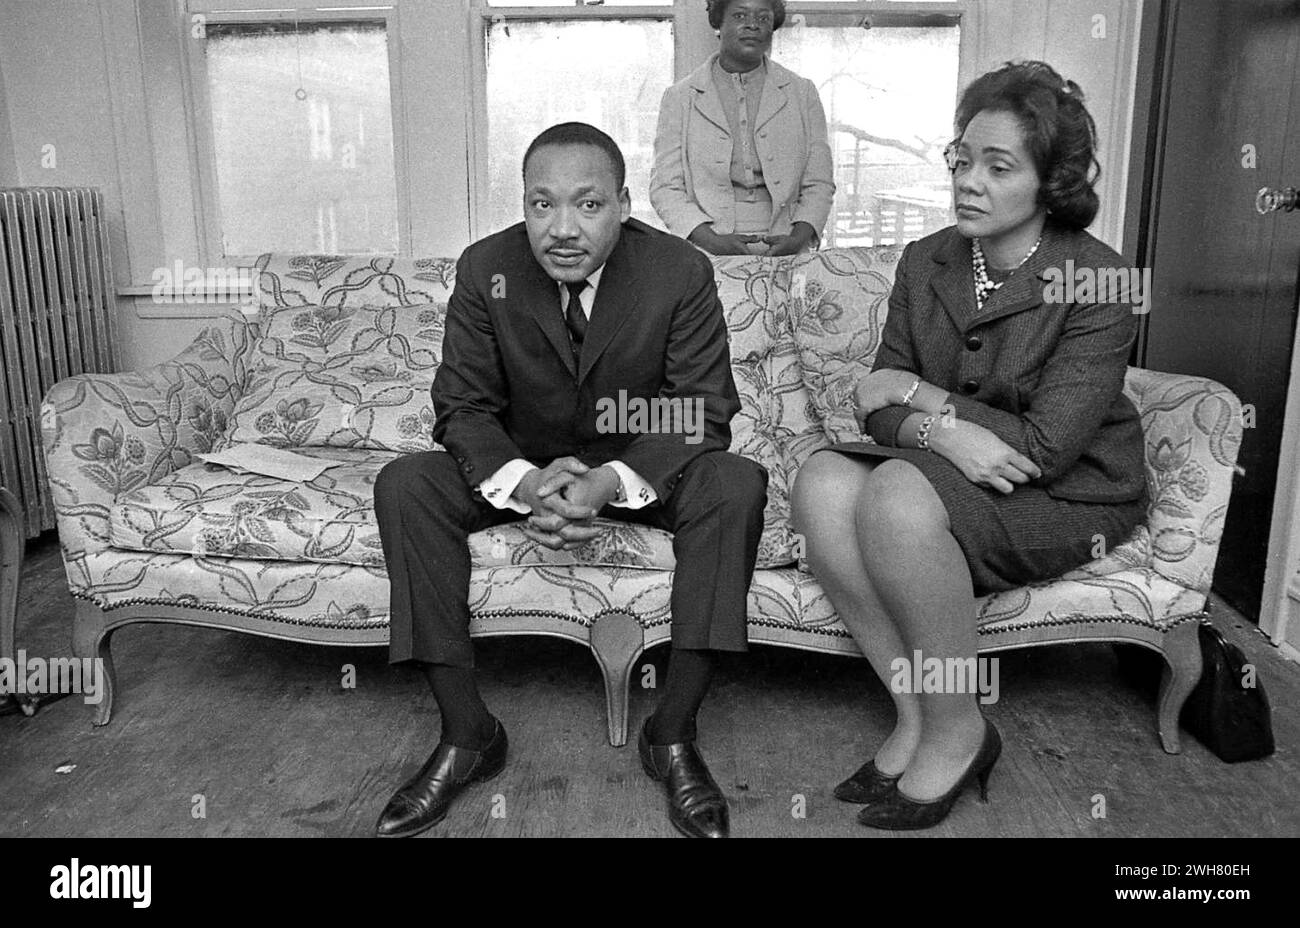 Dr. Martin Luther King Jr. Seated With Coretta Scott King in a Modest Living Room During Fair Housing Movement Stock Photo